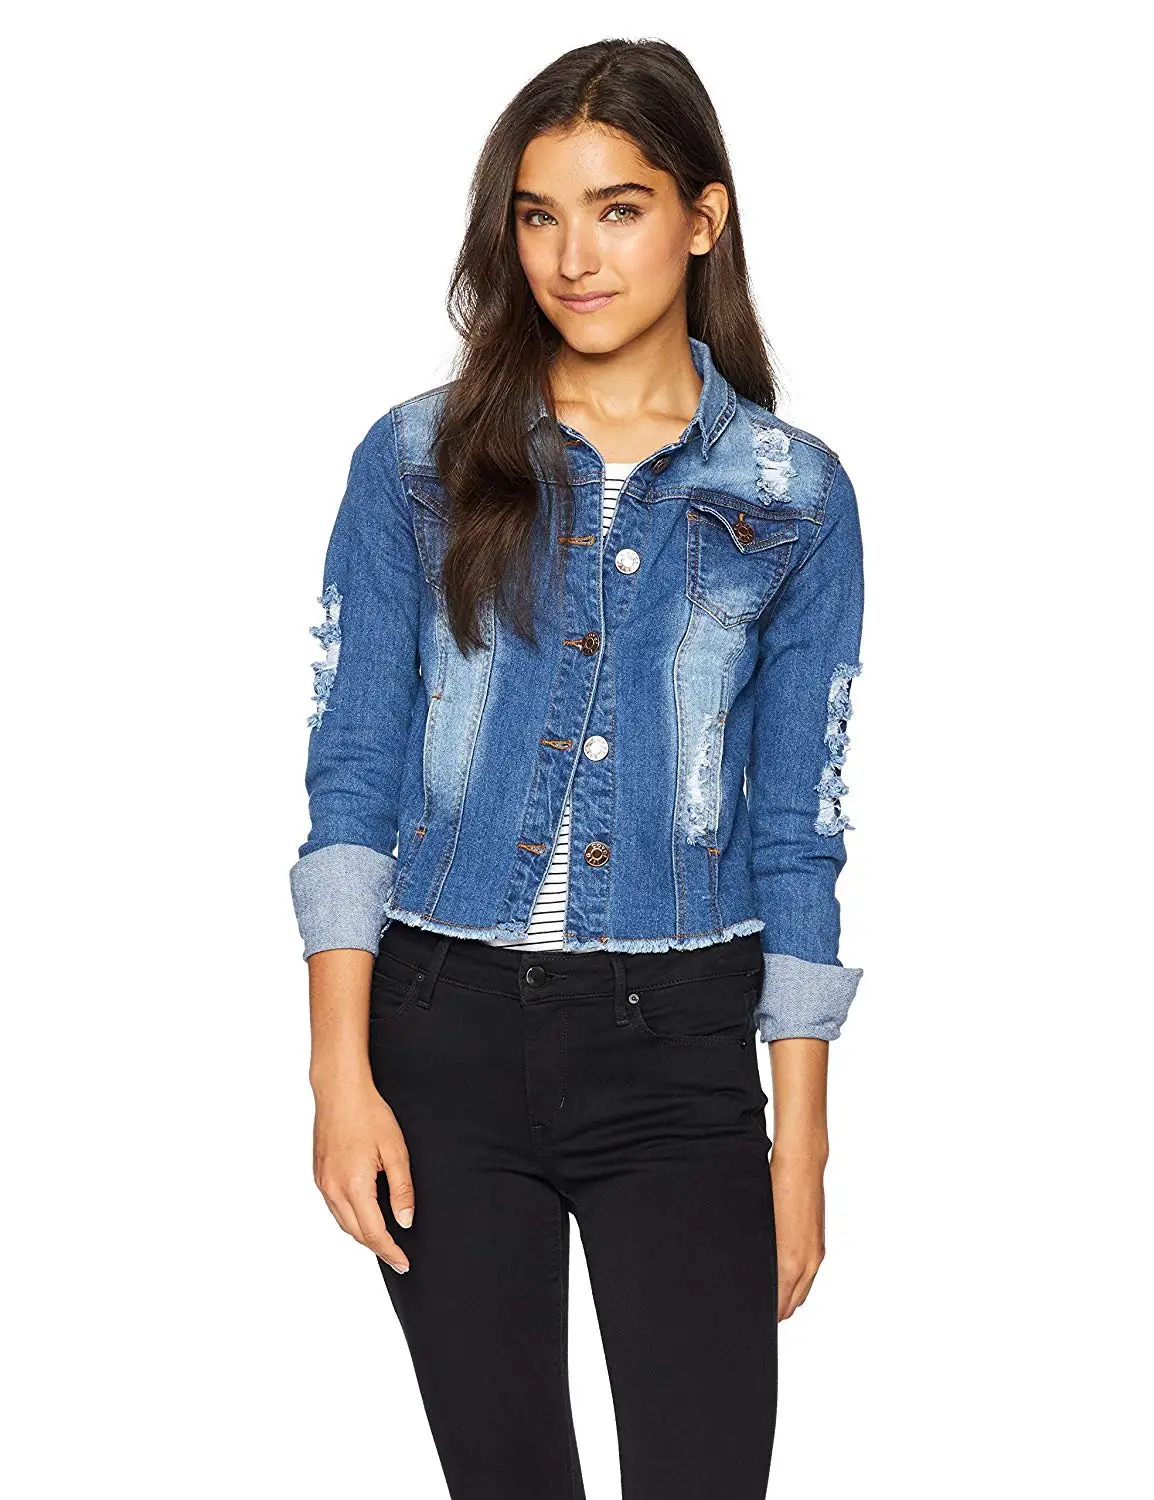 Cheap G Star Jeans Jacket, find G Star Jeans Jacket deals on line at ...